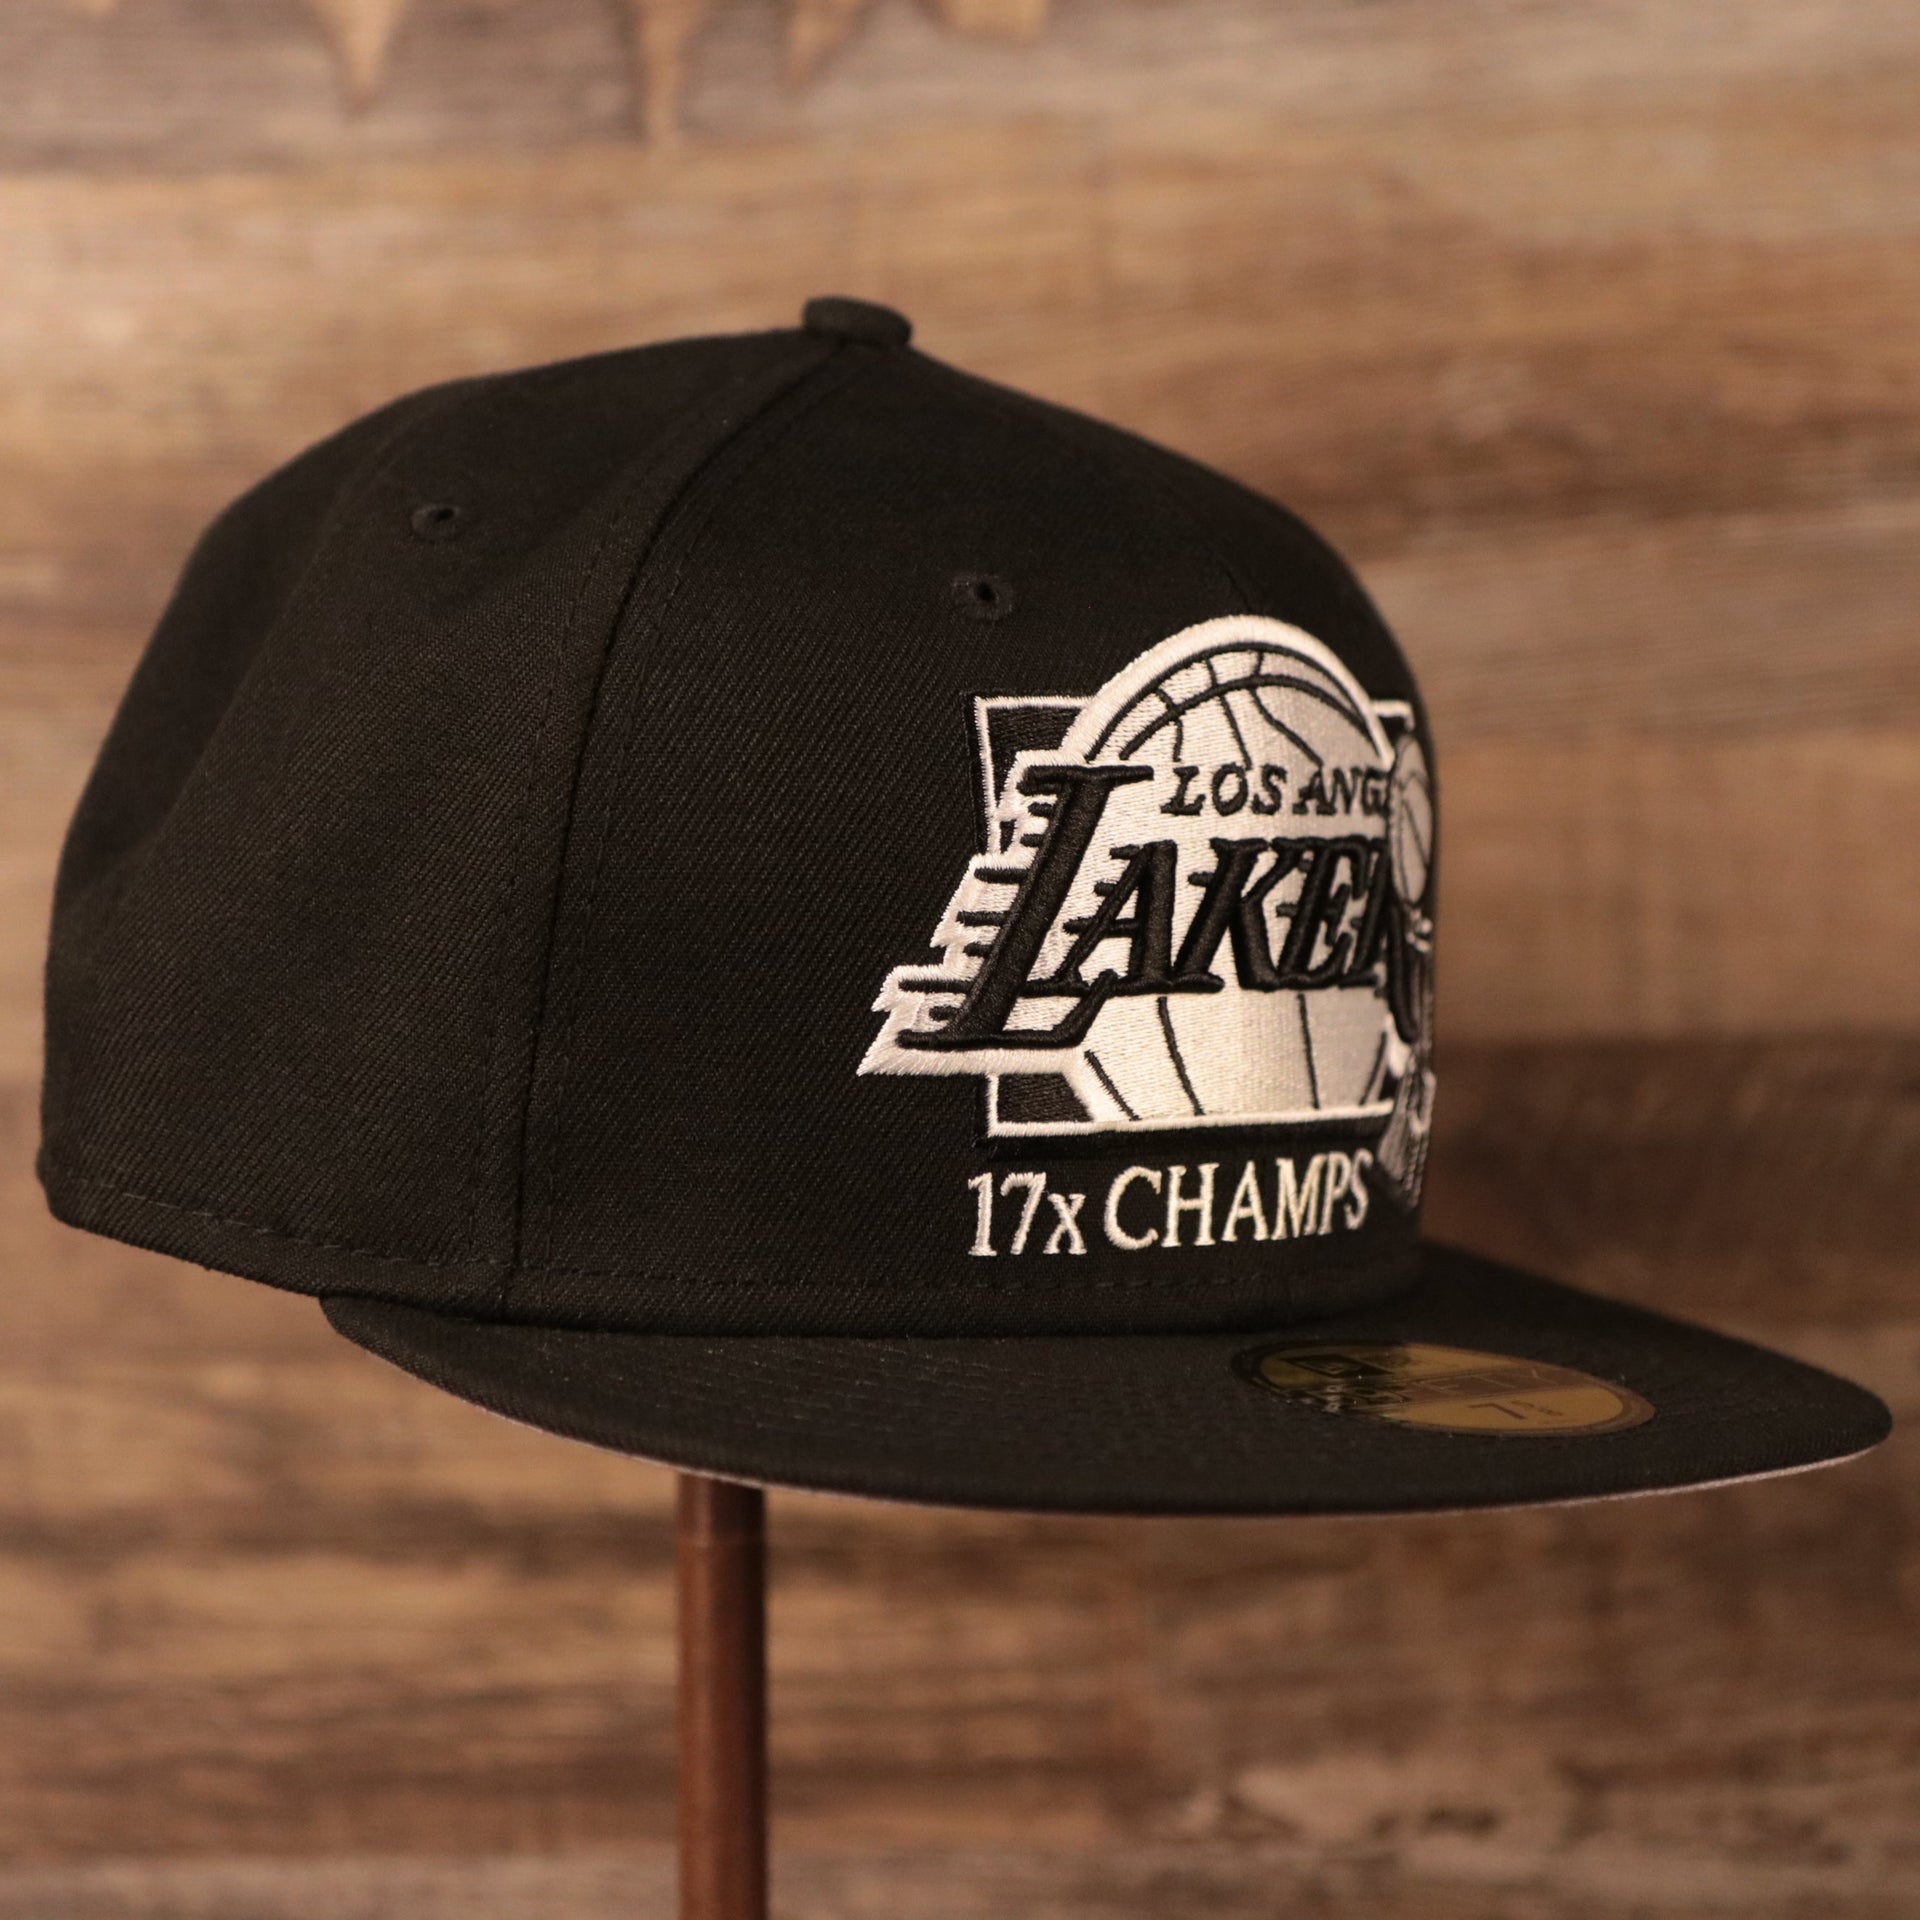 The Lakers champs 59Fifty hat with gray underbrim by New Era.